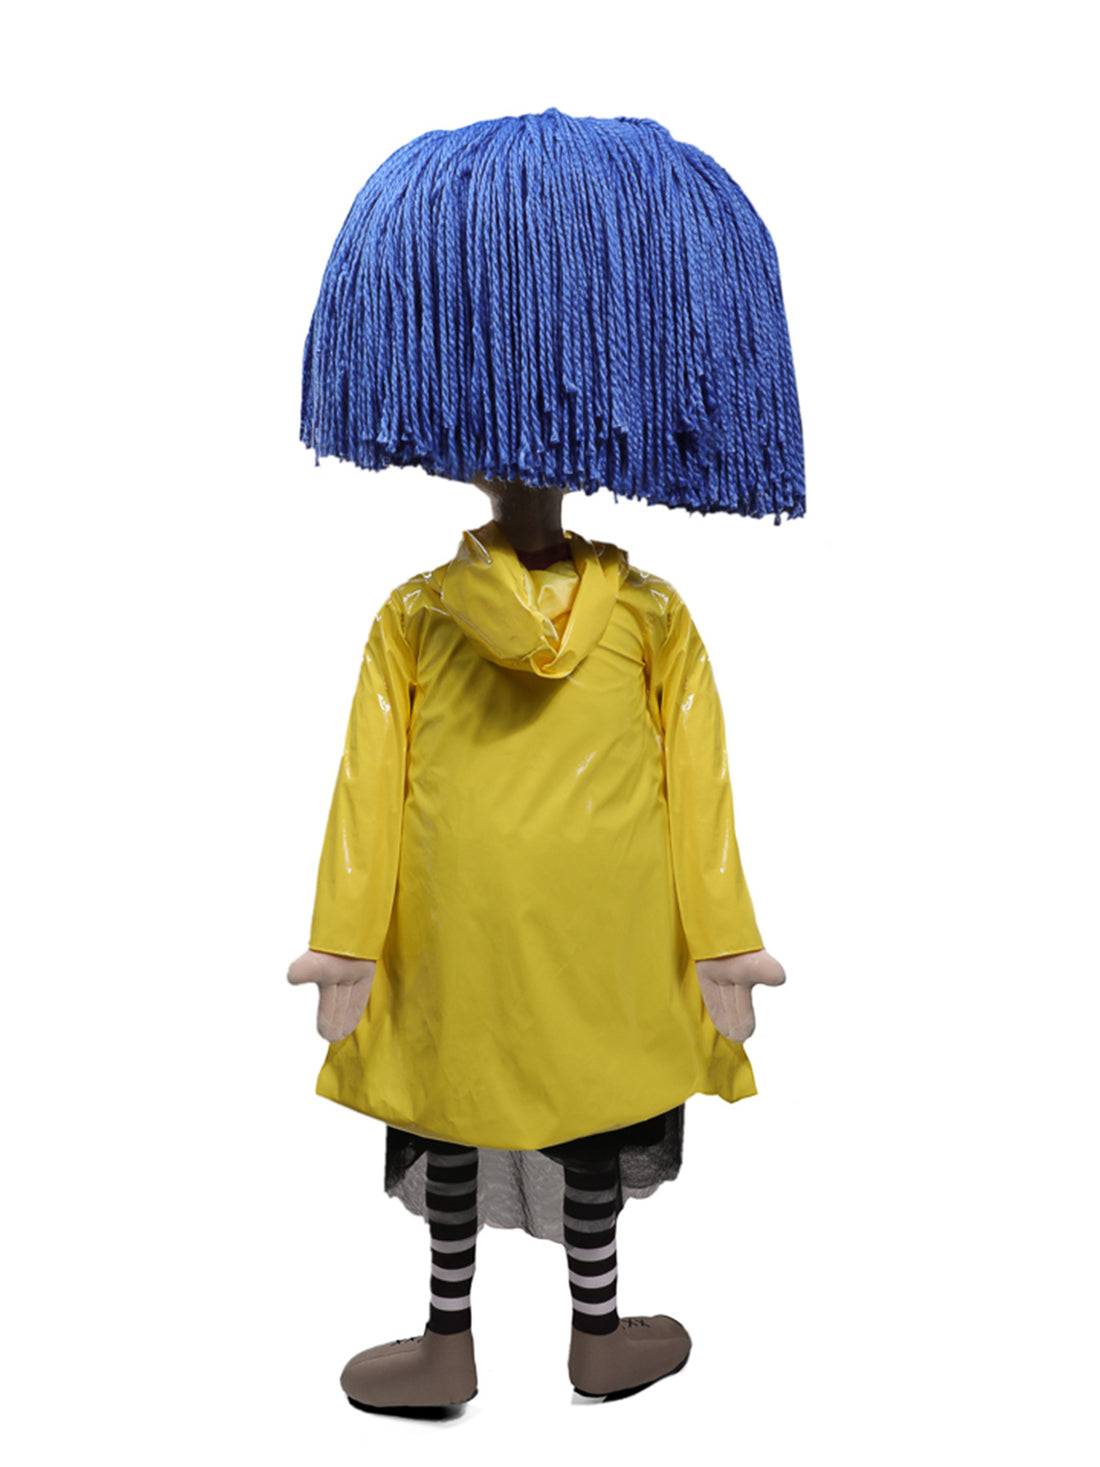 BUY NOW - CORALINE BUTTON EYES (STAND) 5FT LIFE SIZE PLUSH | NECA ONLINE 